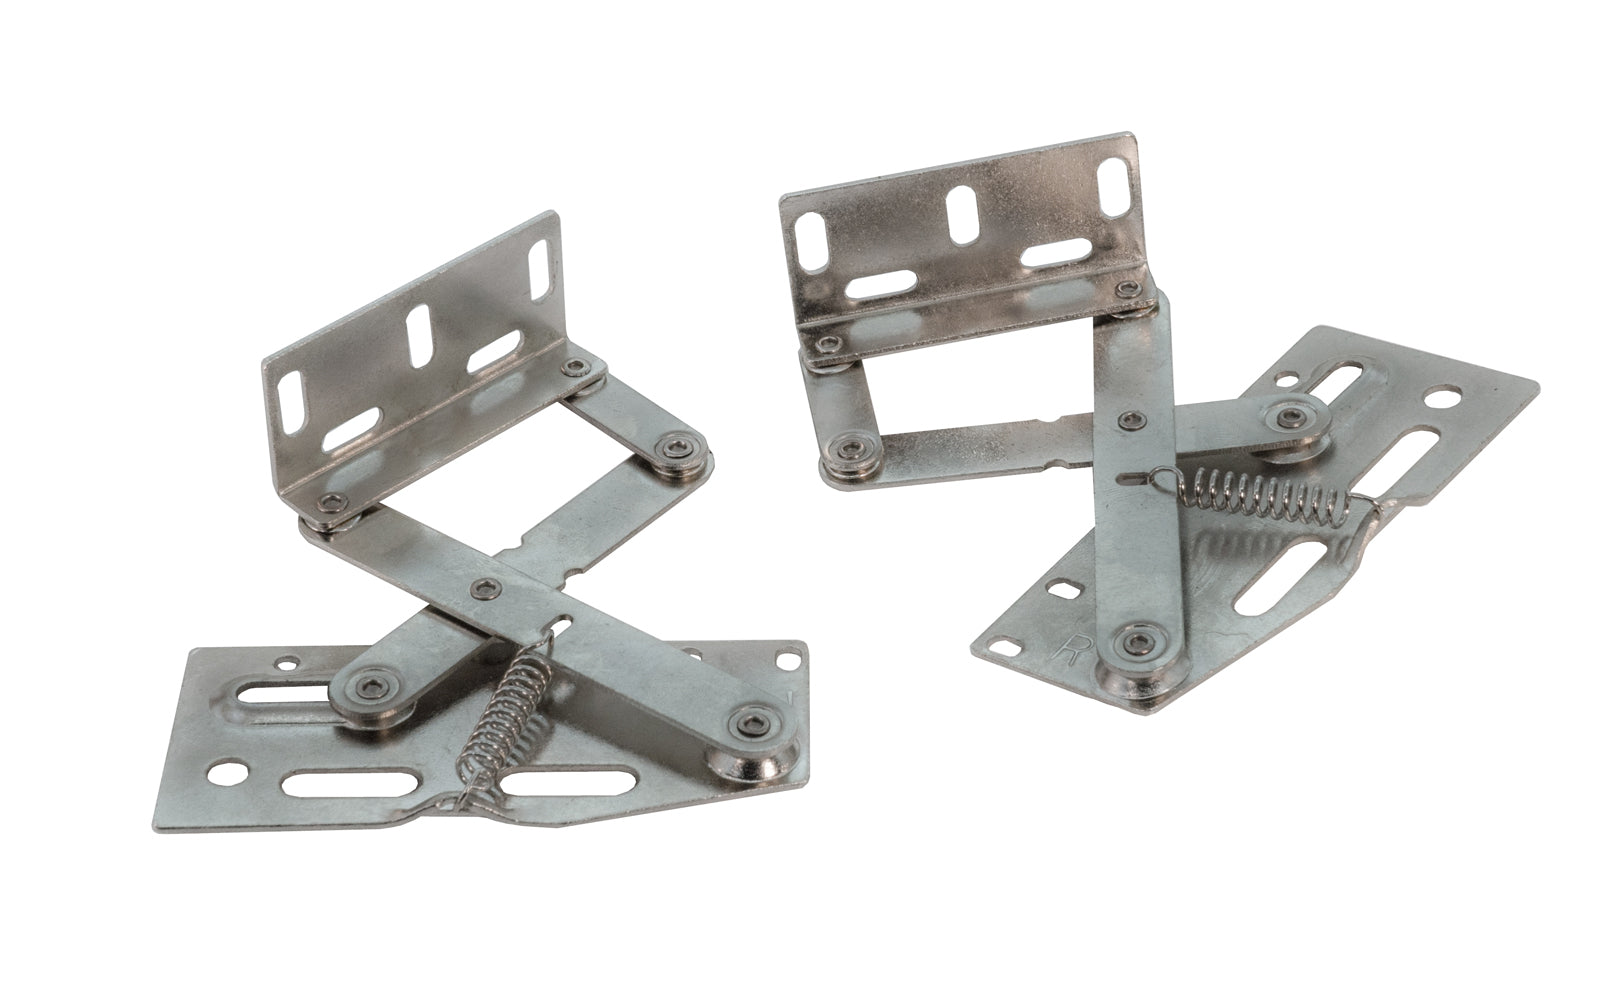 KV Scissor & Euro Tray Hinges - Pair. These scissor hinges are spring-loaded & self-closing with an internal stop. Works with sink front trays (sold seperately) to turn a false-front panel into usable space. For use with faceframe or frameless (Euro-style) cabinetry. Mounting hardware and instructions included. Not intended for full-overlay or inset cabinet applications. Knape & Vogt.